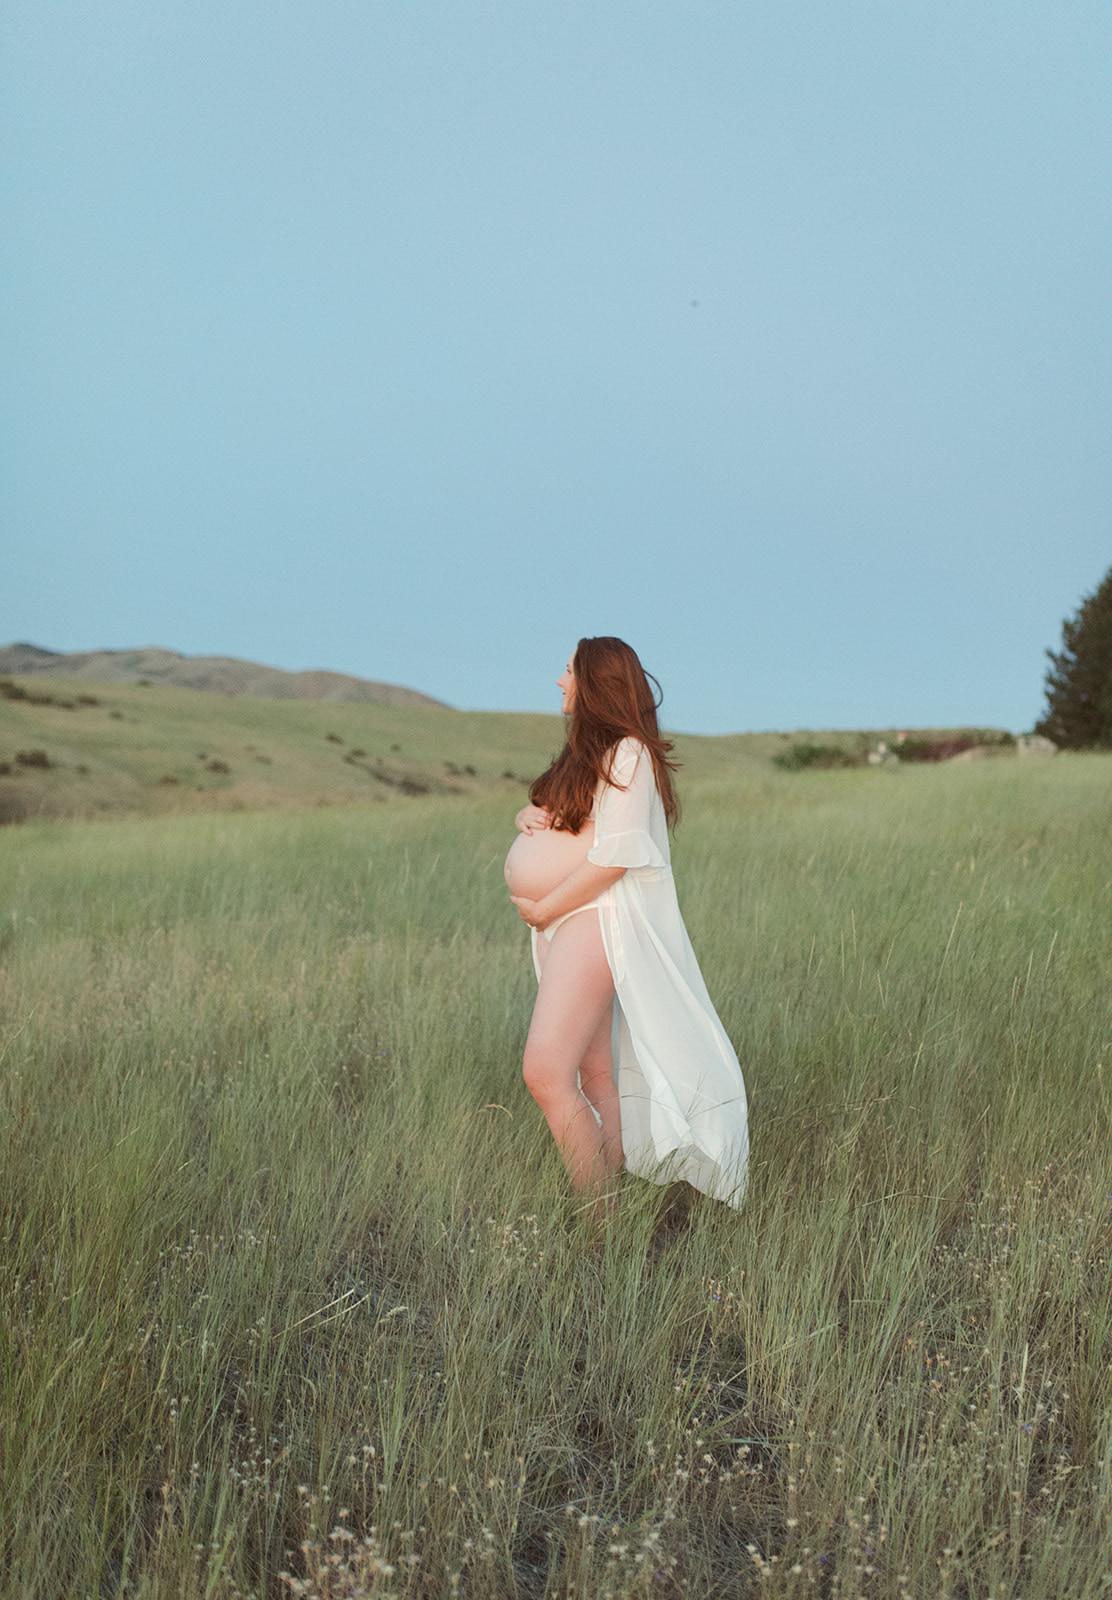 Twin Maternity Session in the Boise Foothills | Maternity photos by Hannah Mann | Idaho photographer serving the Treasur